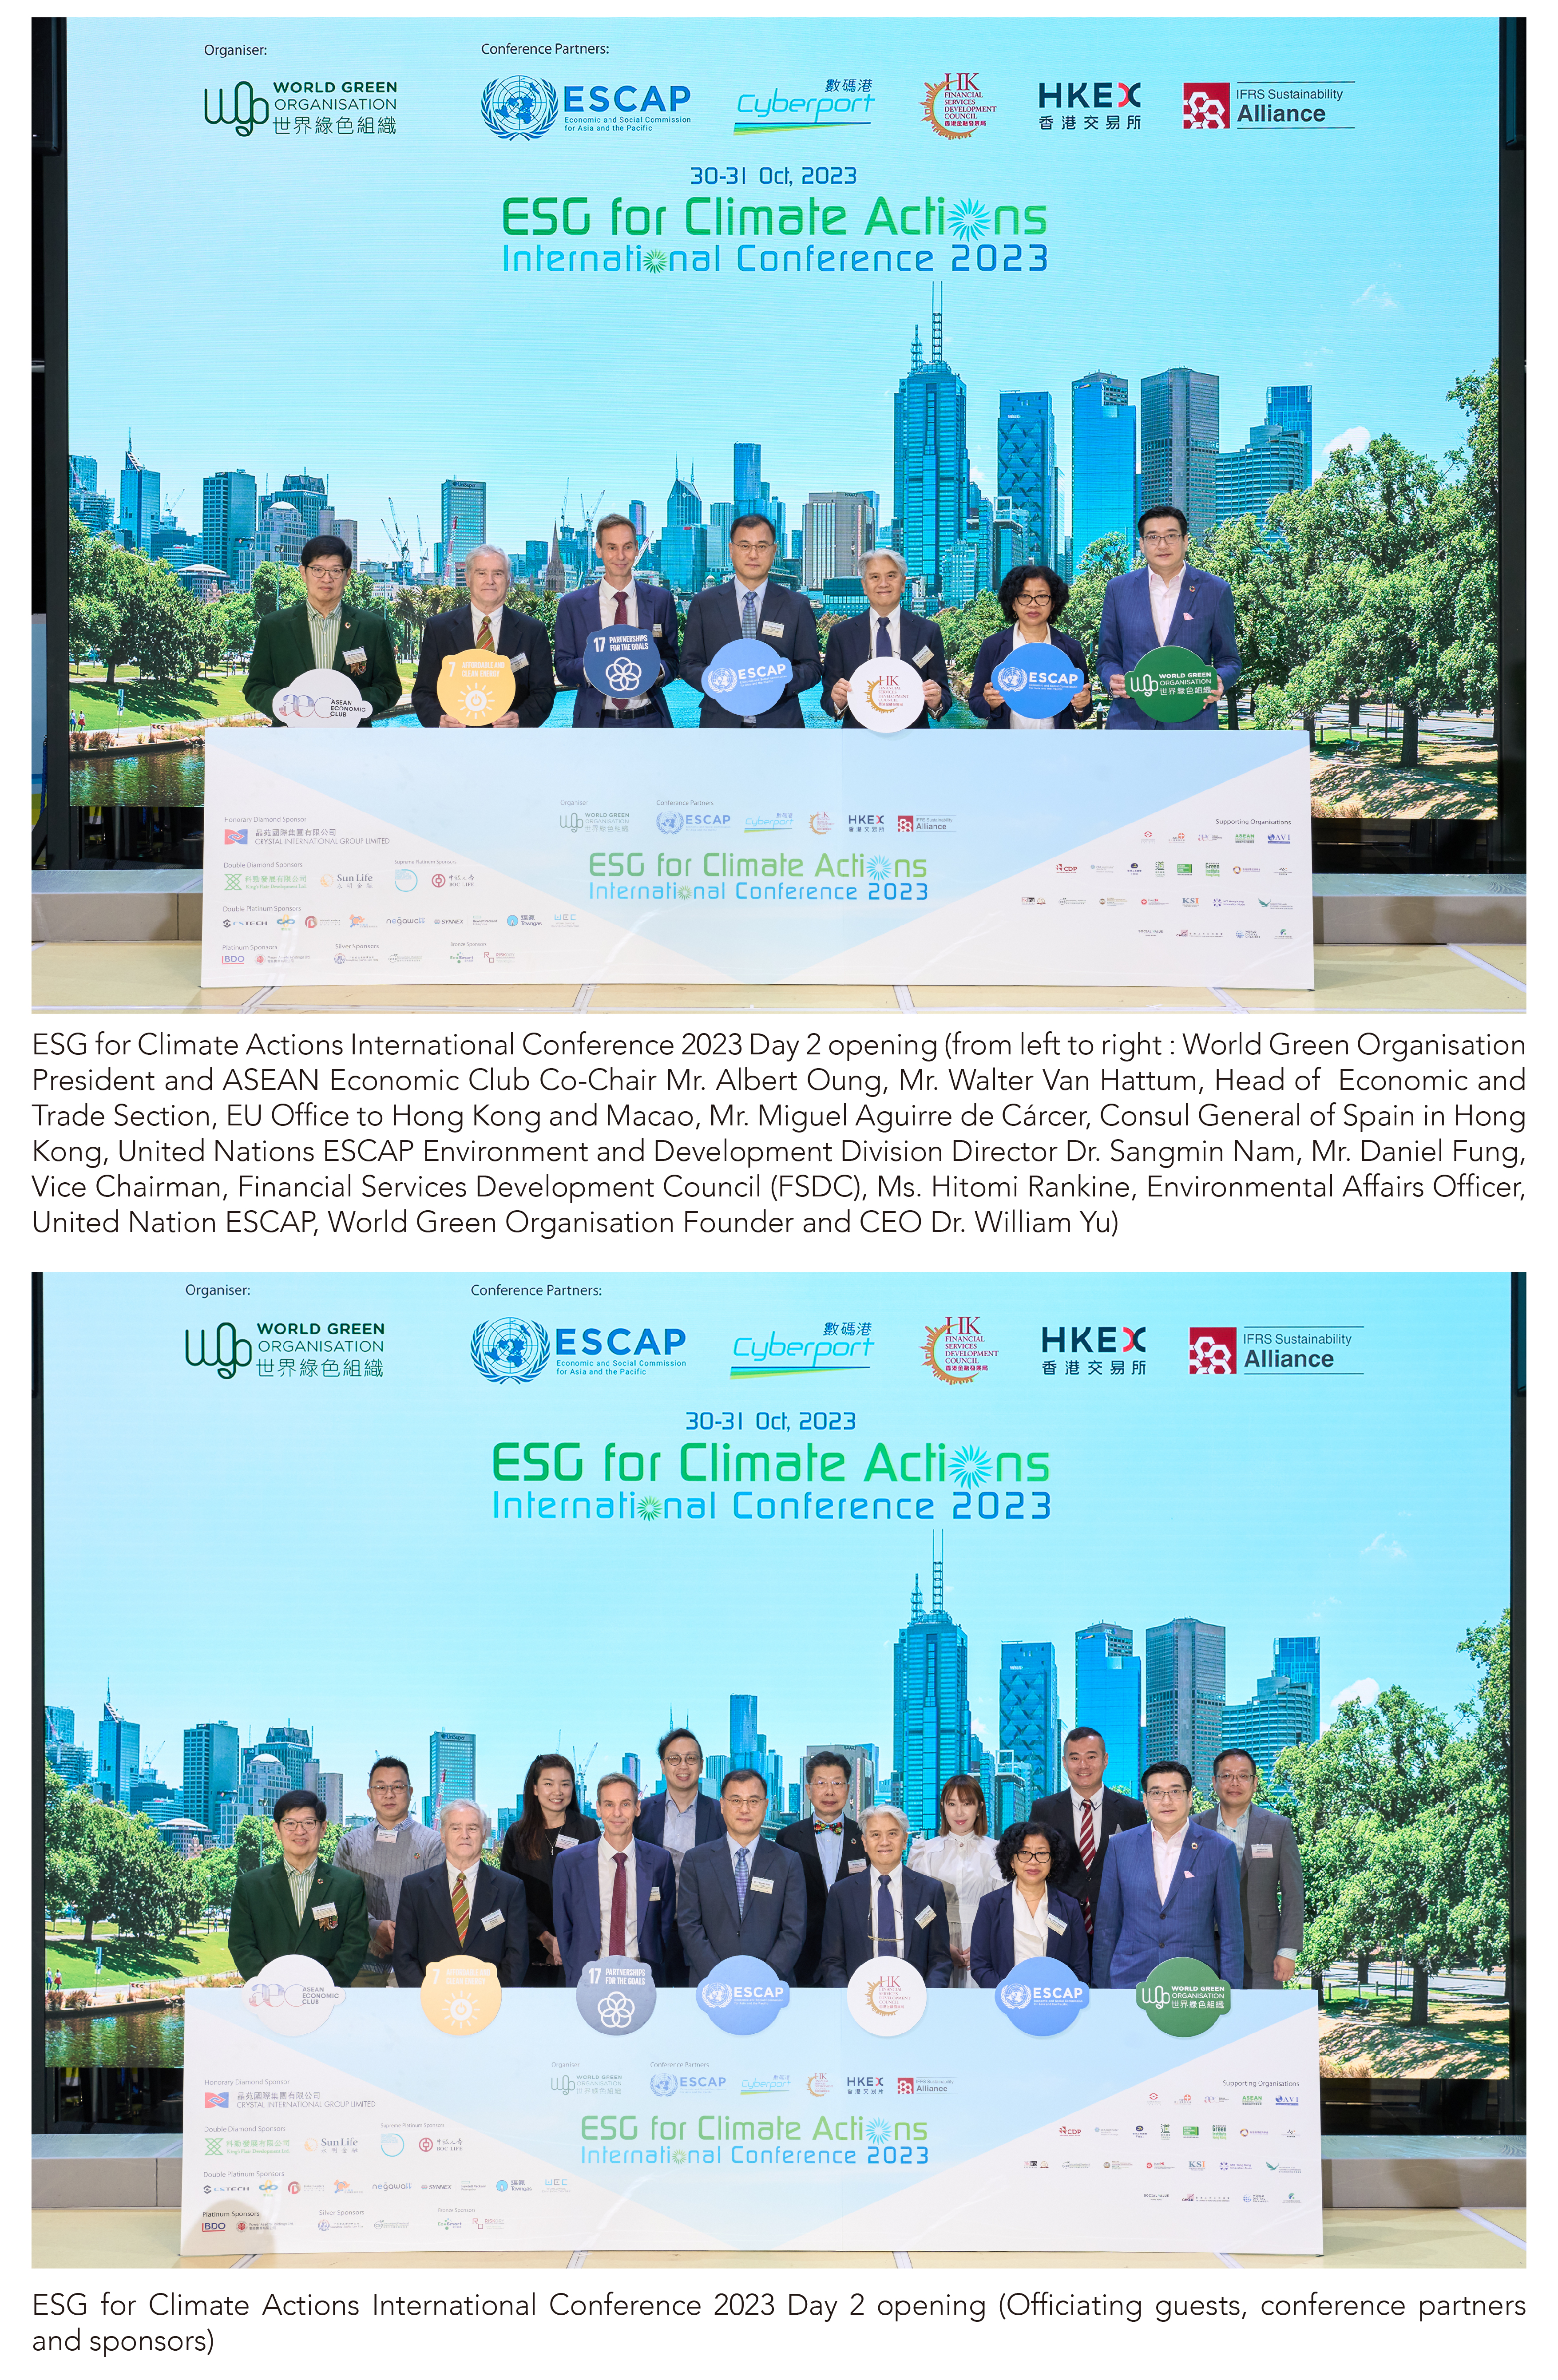 ESG for Climate Actions International Conference 2023 Day 2